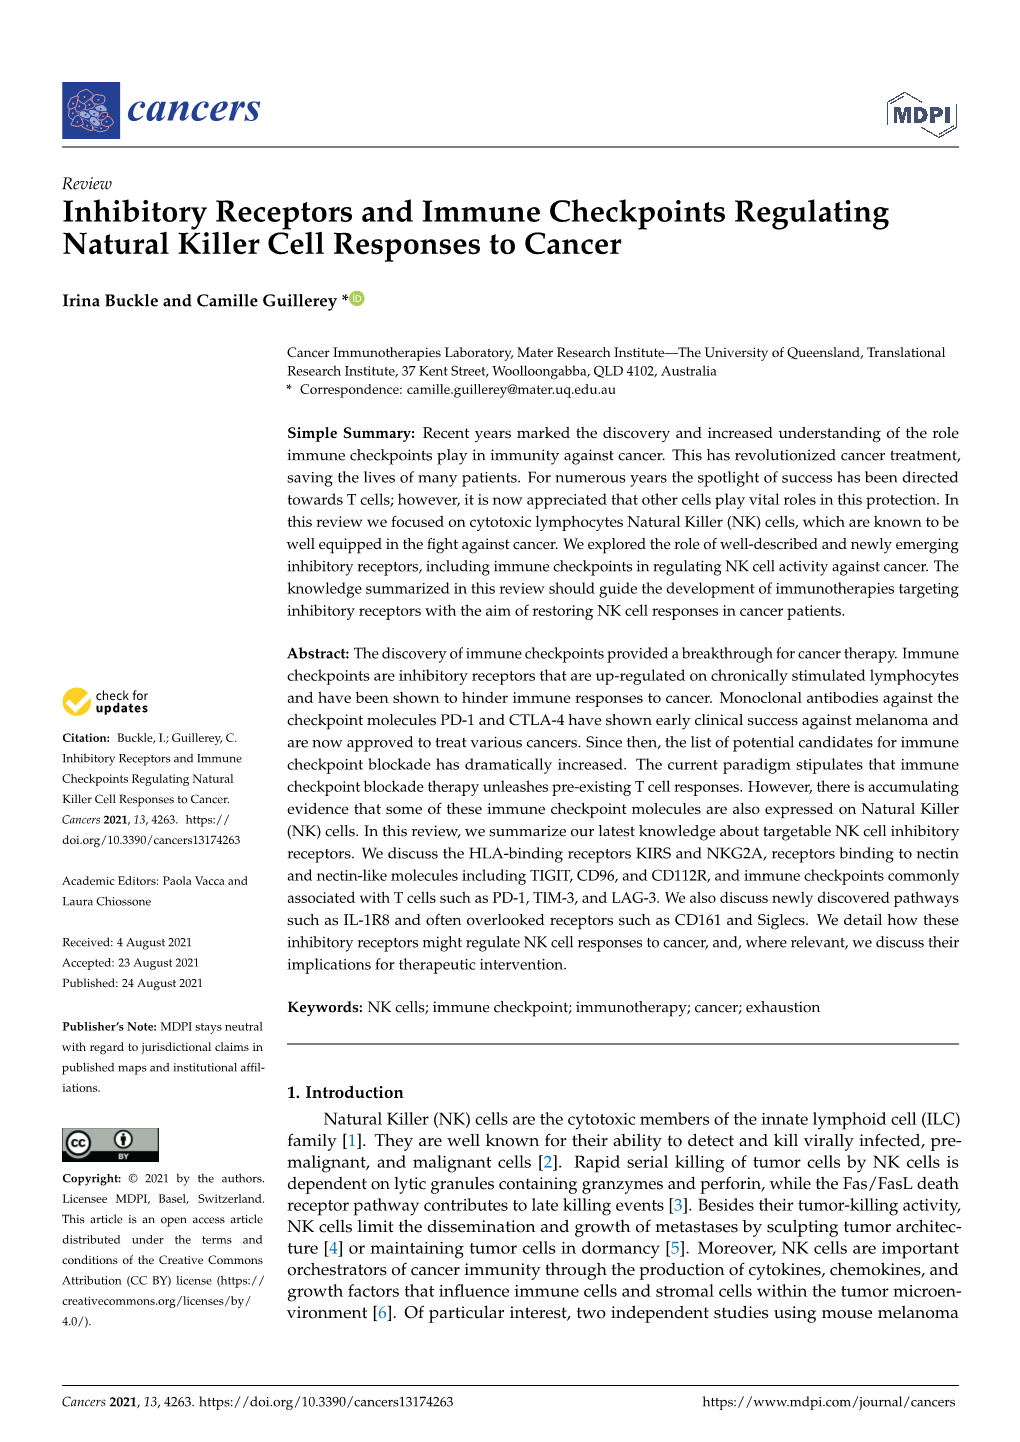 Inhibitory Receptors and Immune Checkpoints Regulating Natural Killer Cell Responses to Cancer